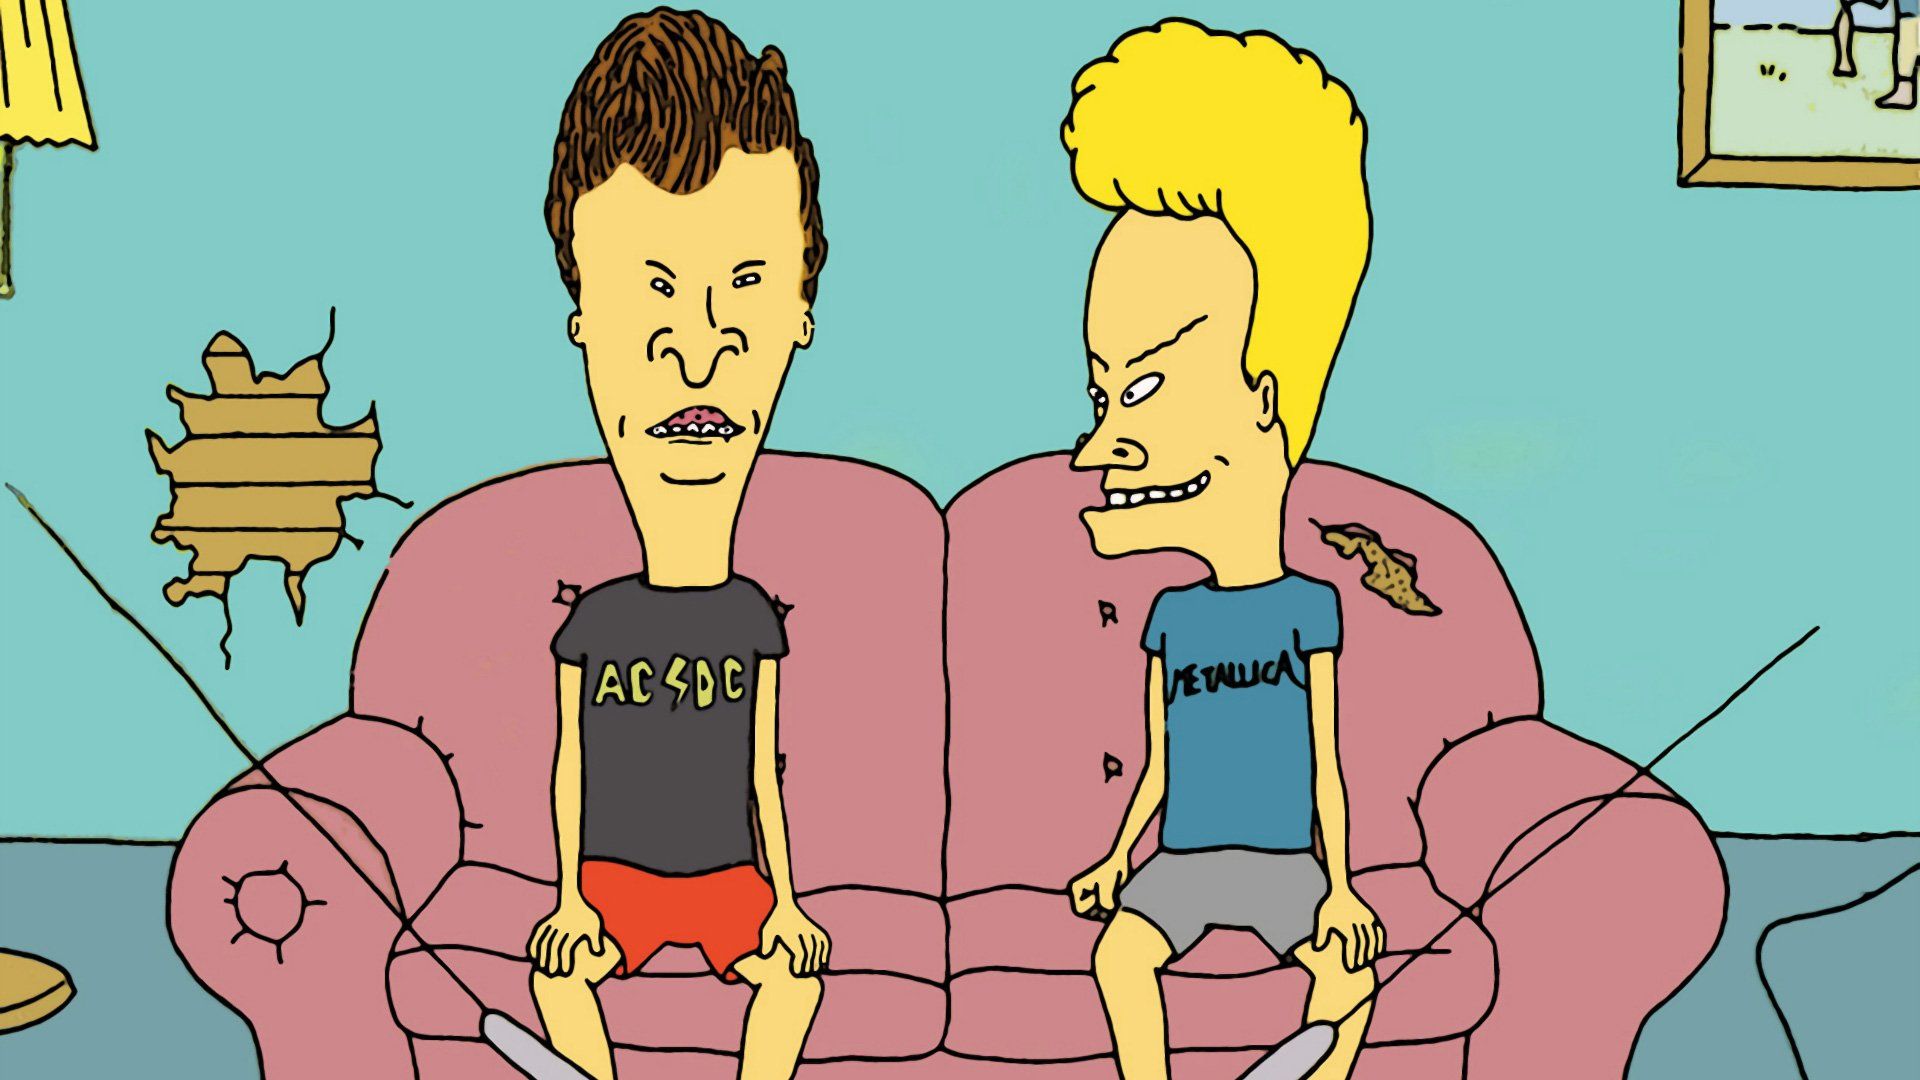 Beavis And Butt-Head sitting in the couch.